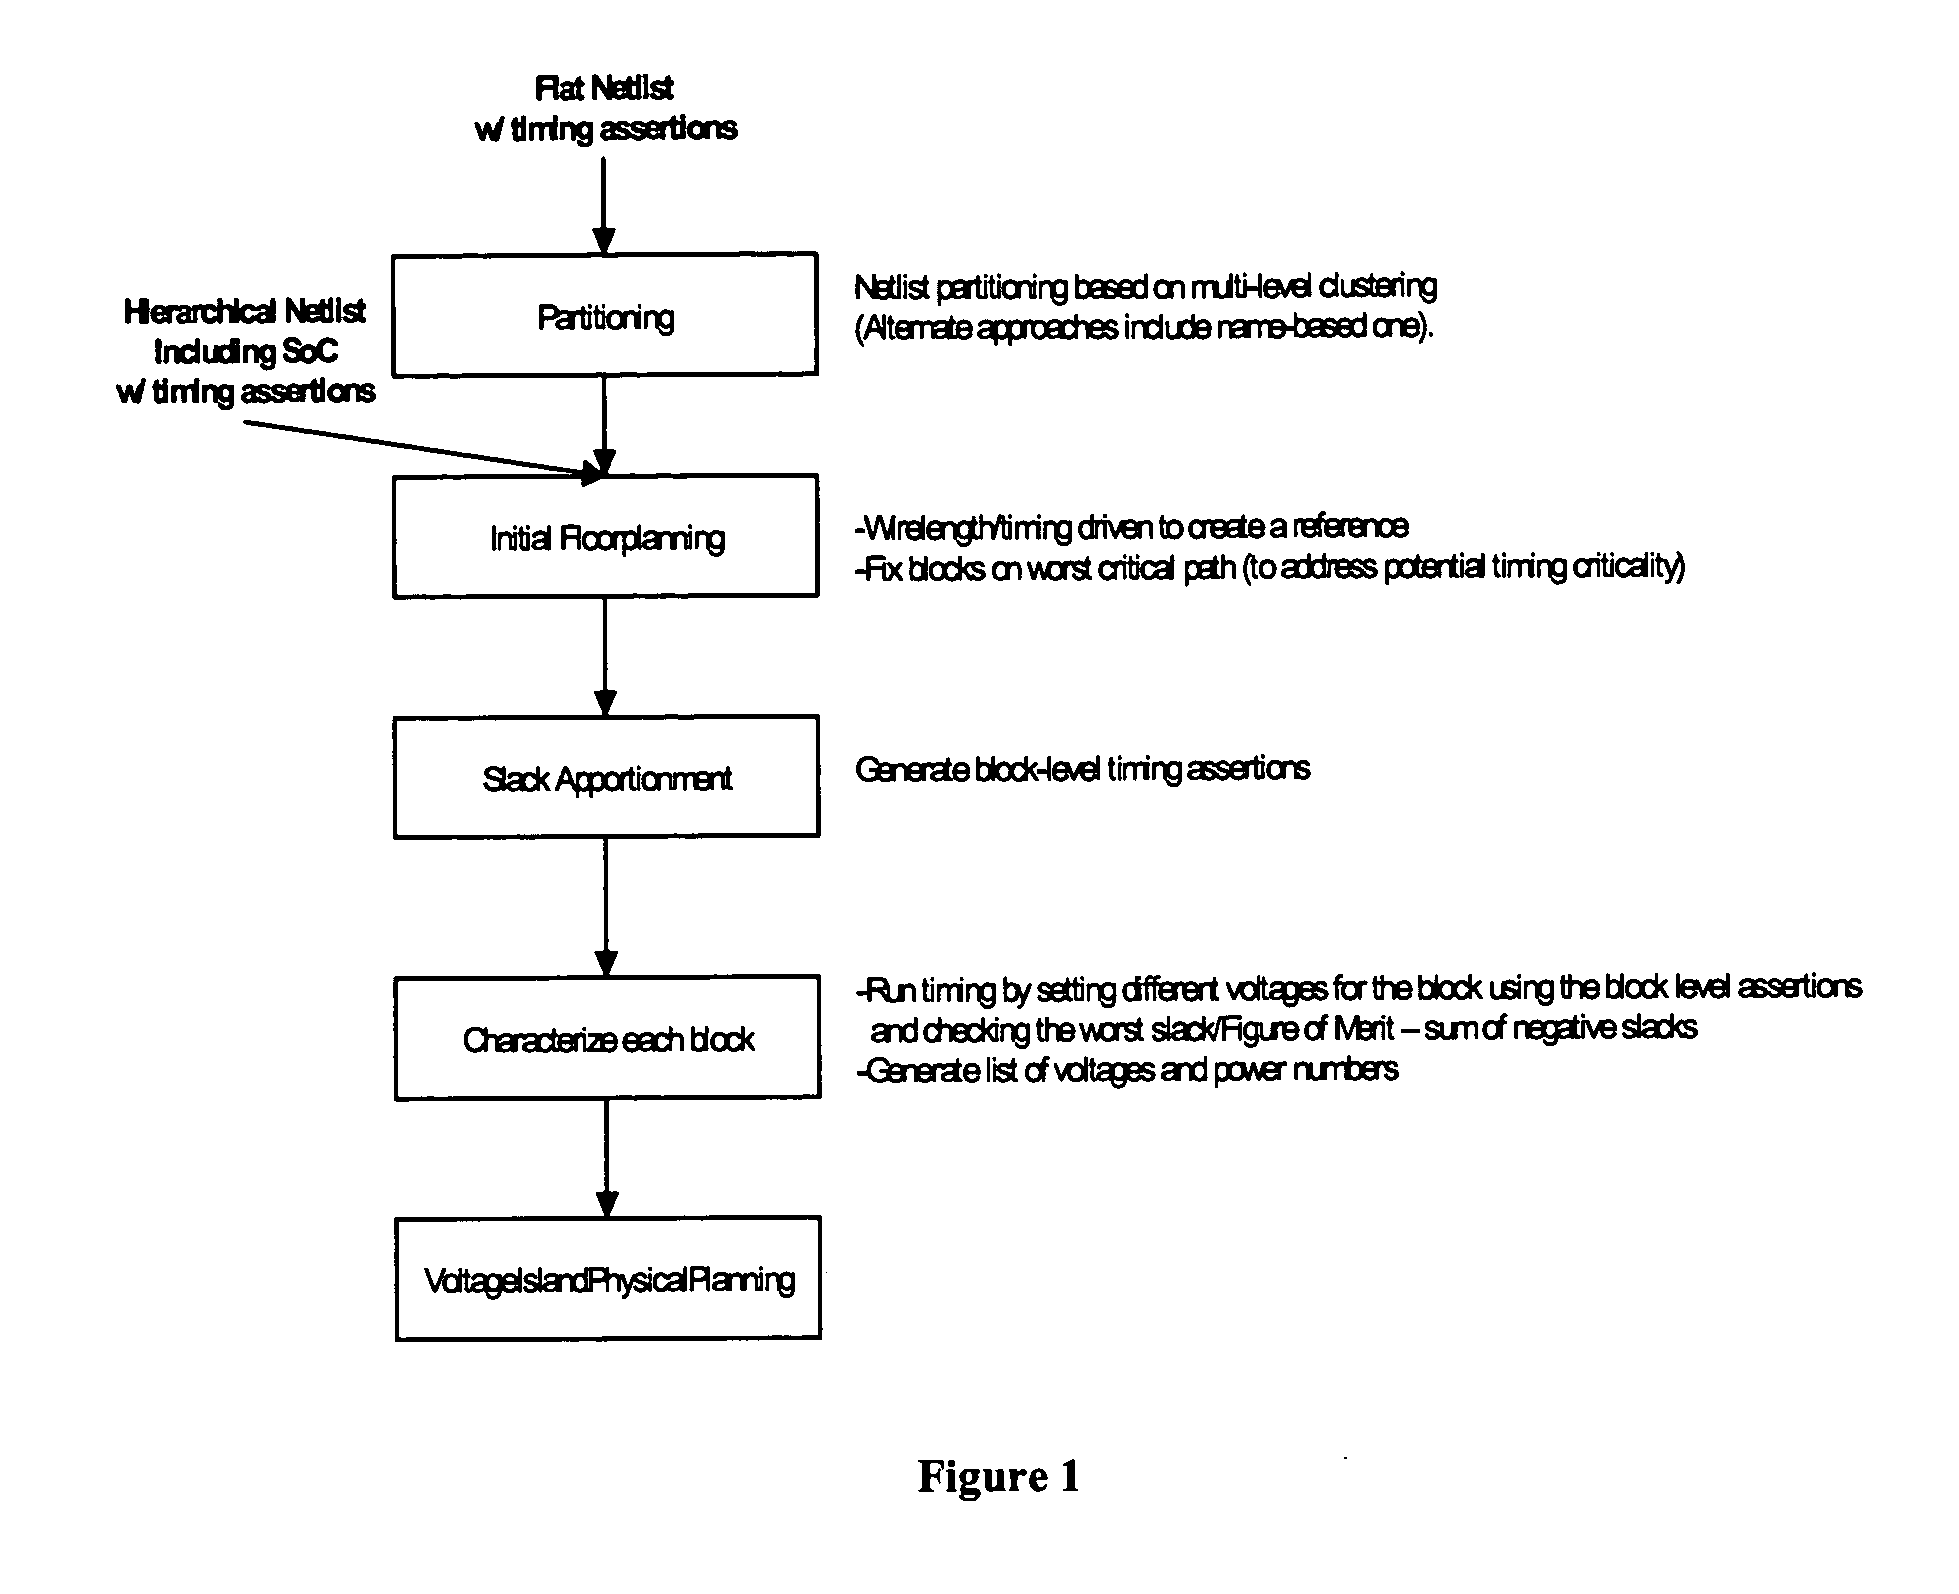 Method of physical planning voltage islands for ASICs and system-on-chip designs